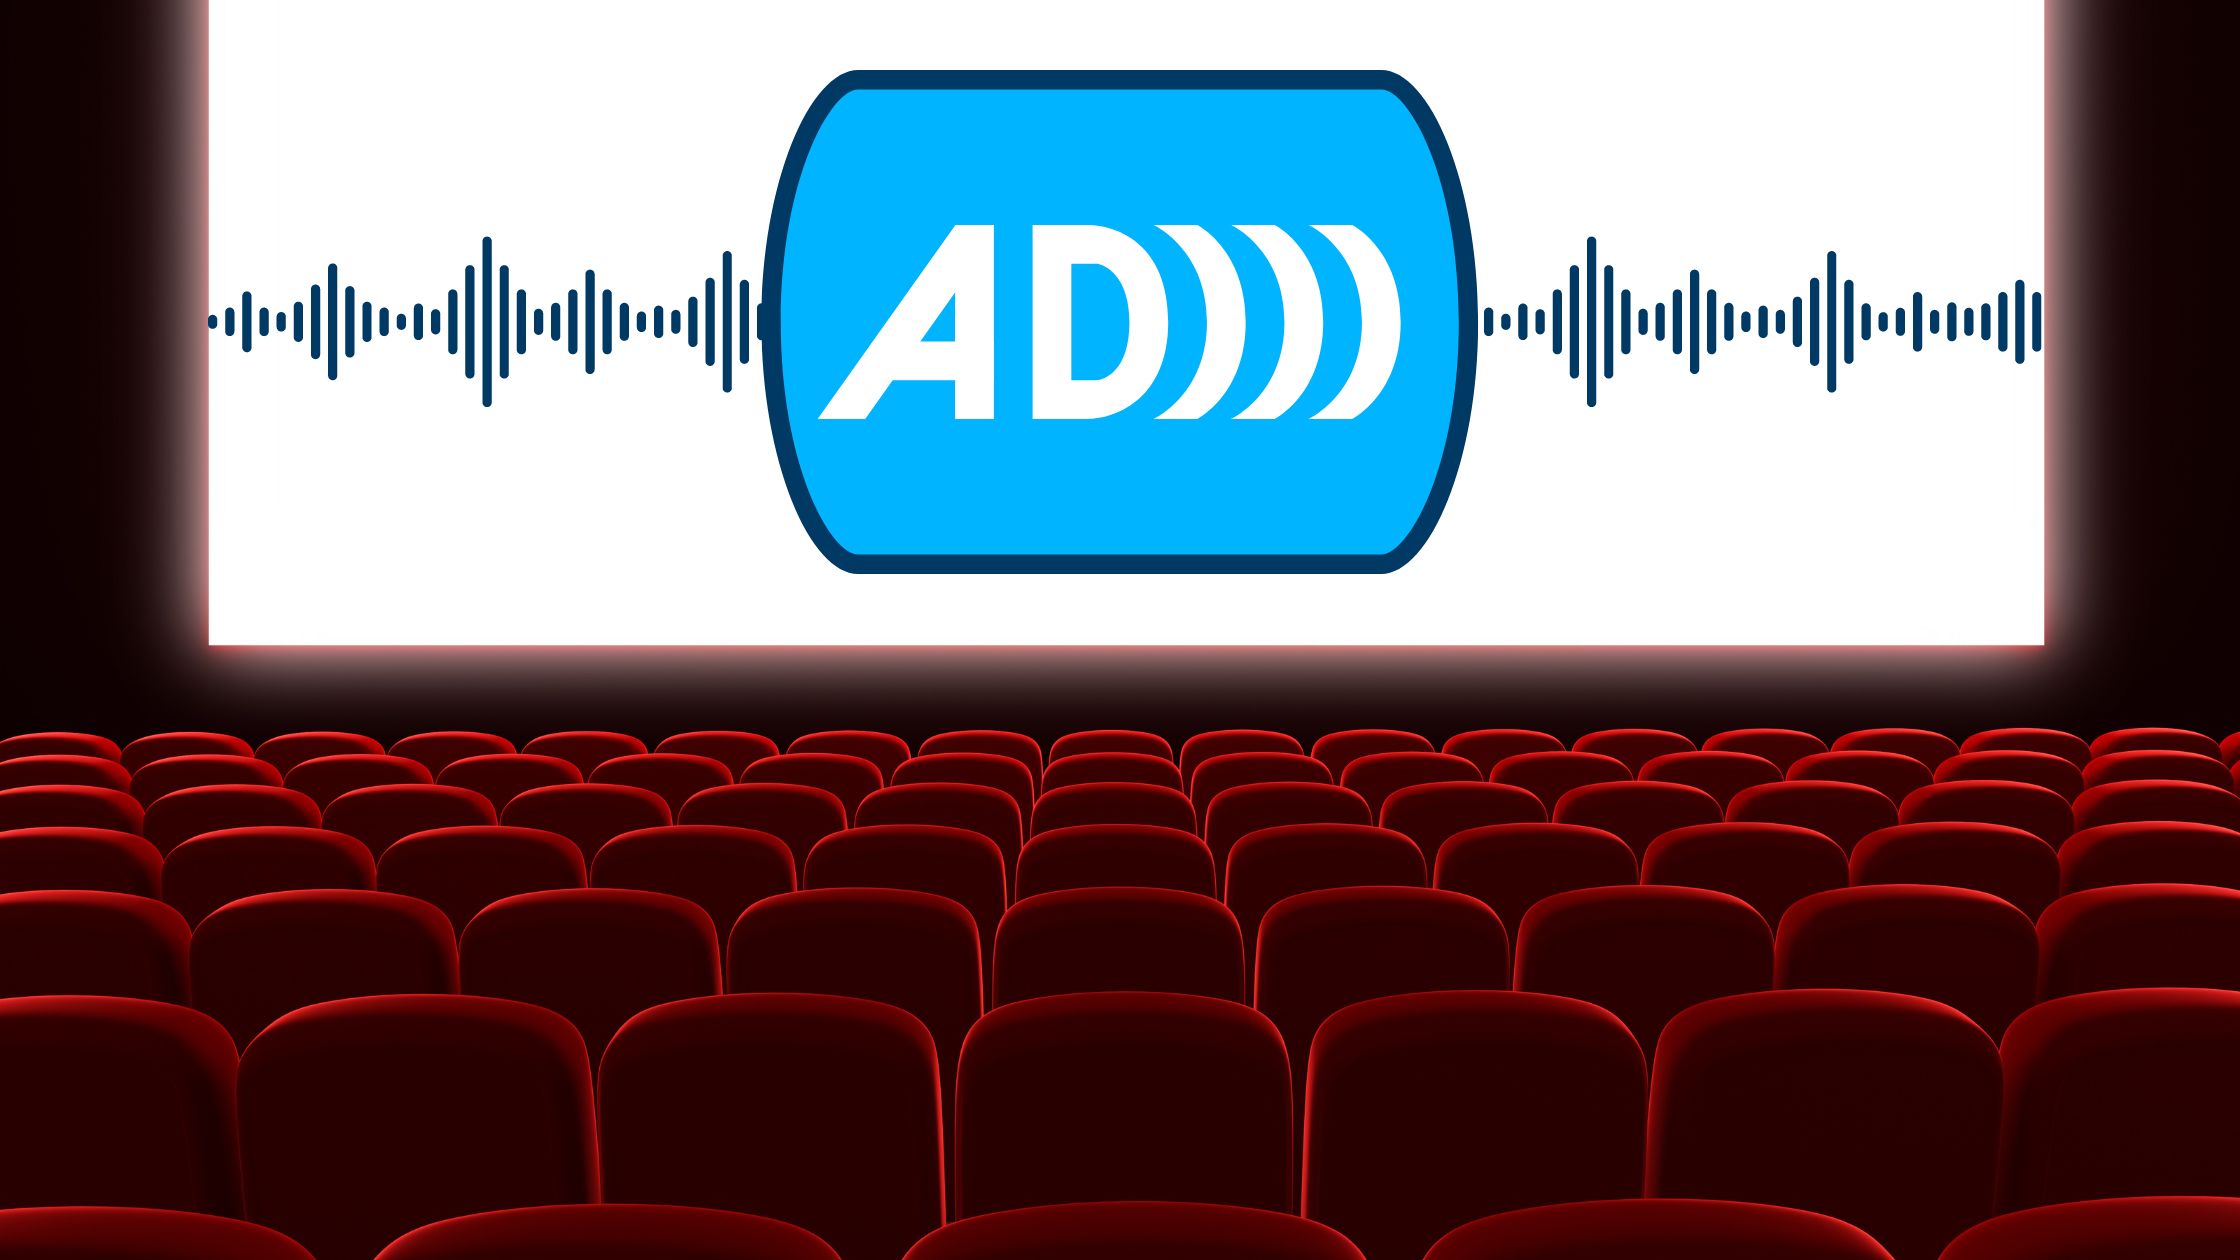 Cinema auditorium, rows of chairs, audio descriptor symbol on screen: capital letters AD.